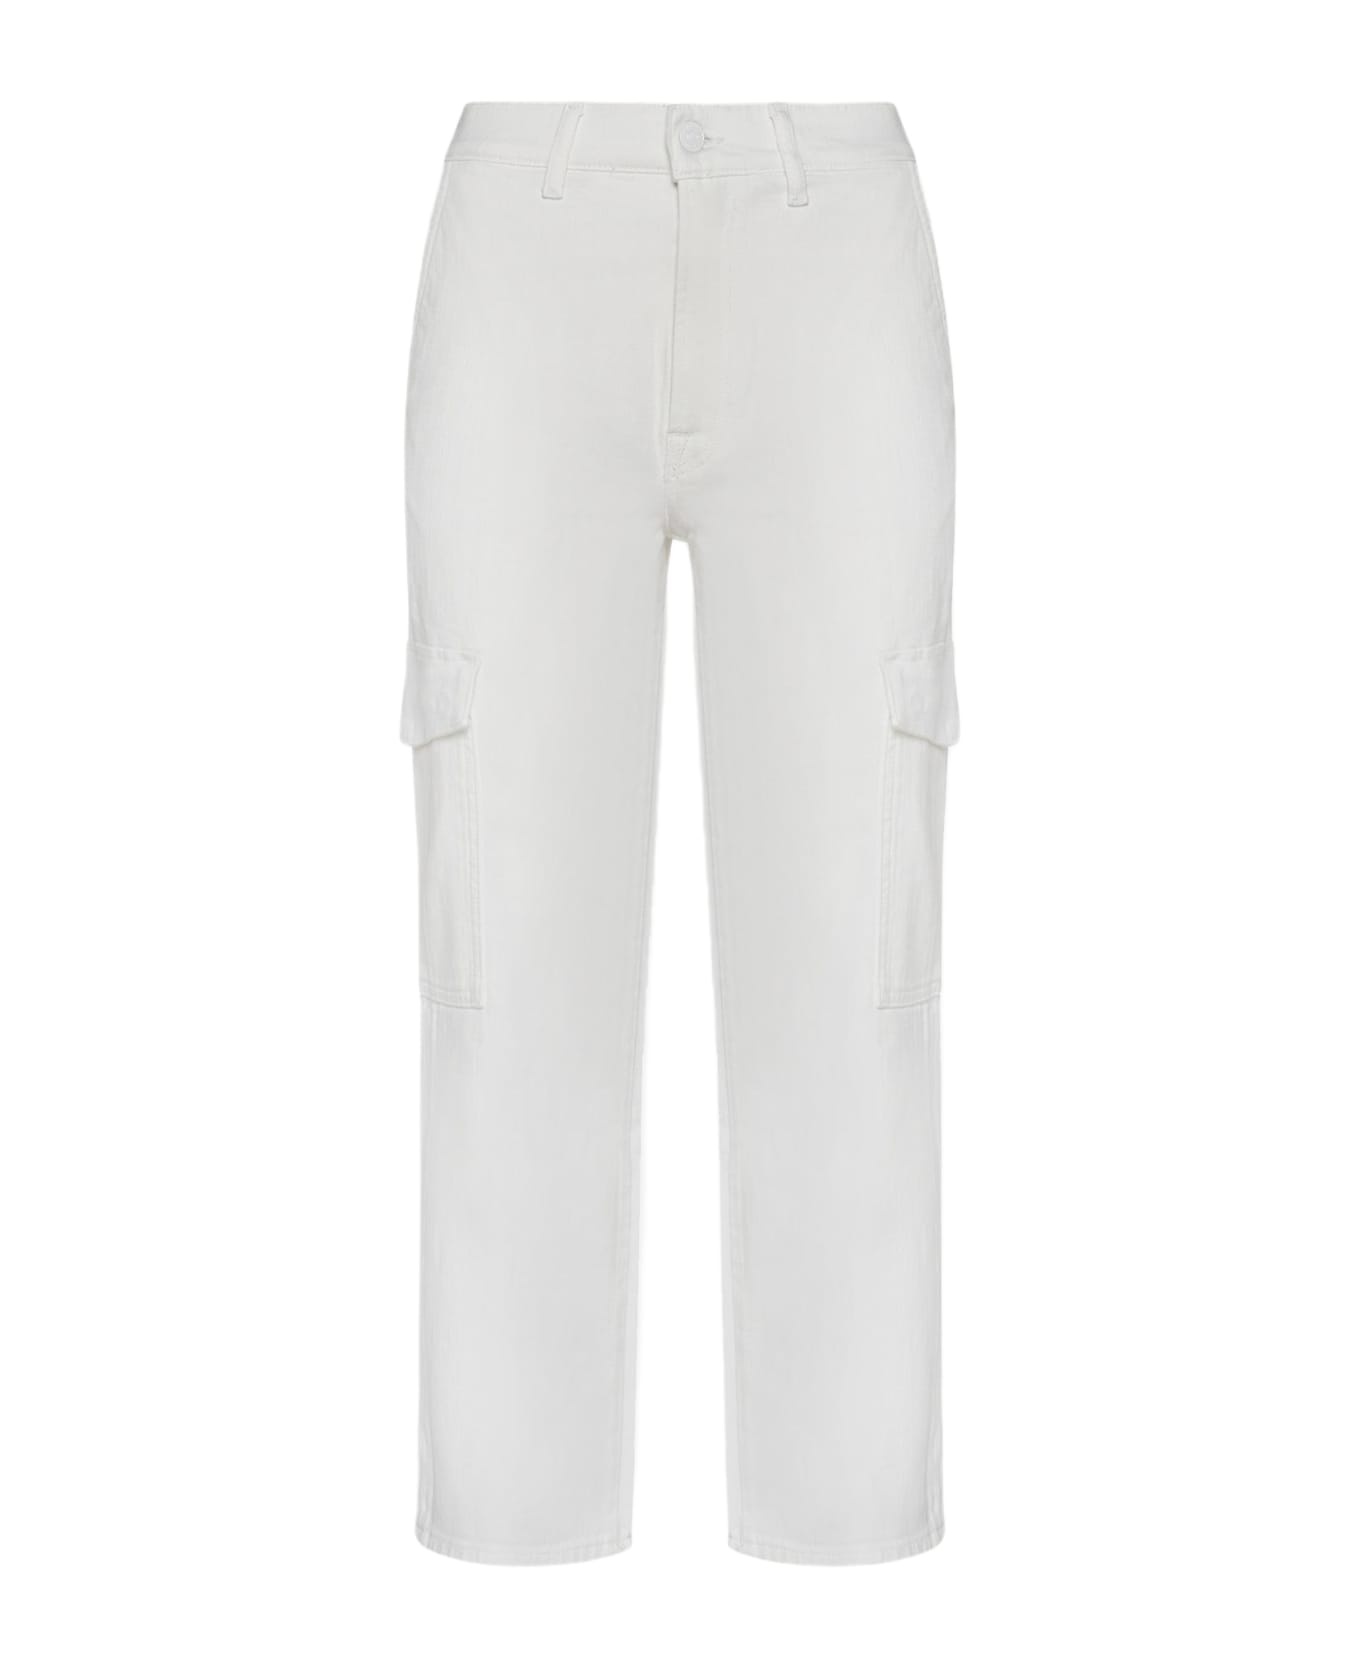 7 For All Mankind Cargo Logan Jeans - White